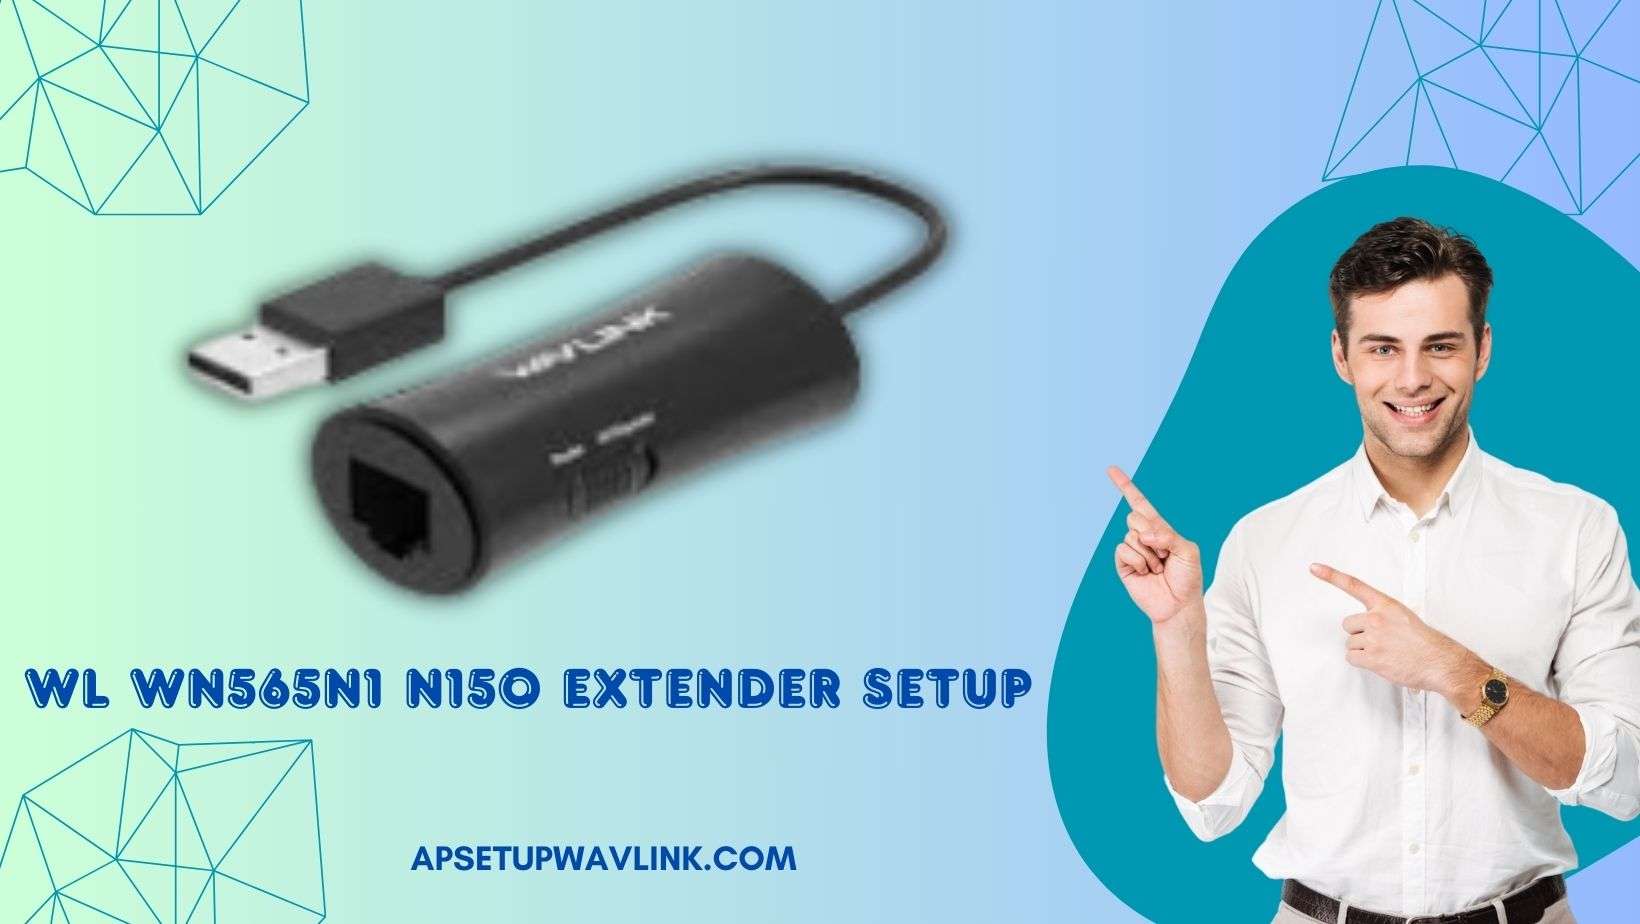 You are currently viewing WL WN565N1 N150 Extender Setup